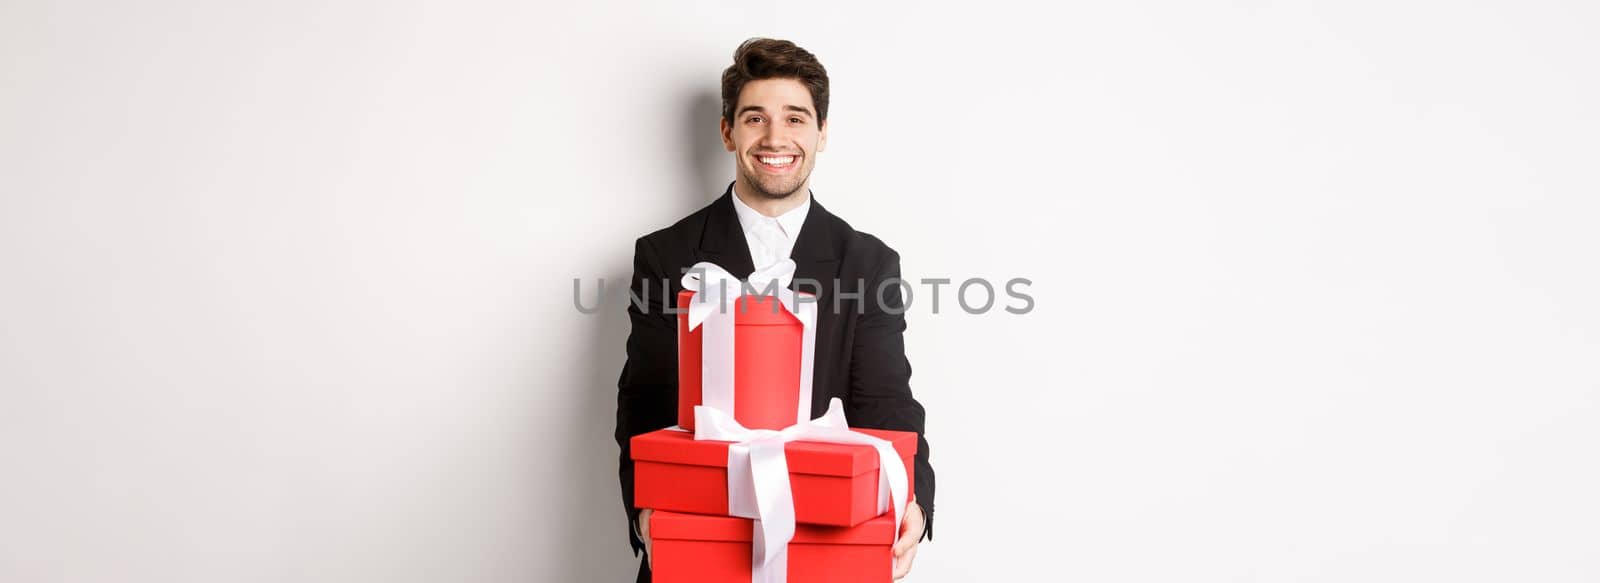 Portrait of handsome bearded man in trendy suit, holding gifts for new year and smiling, prepared presents, standing over white background.